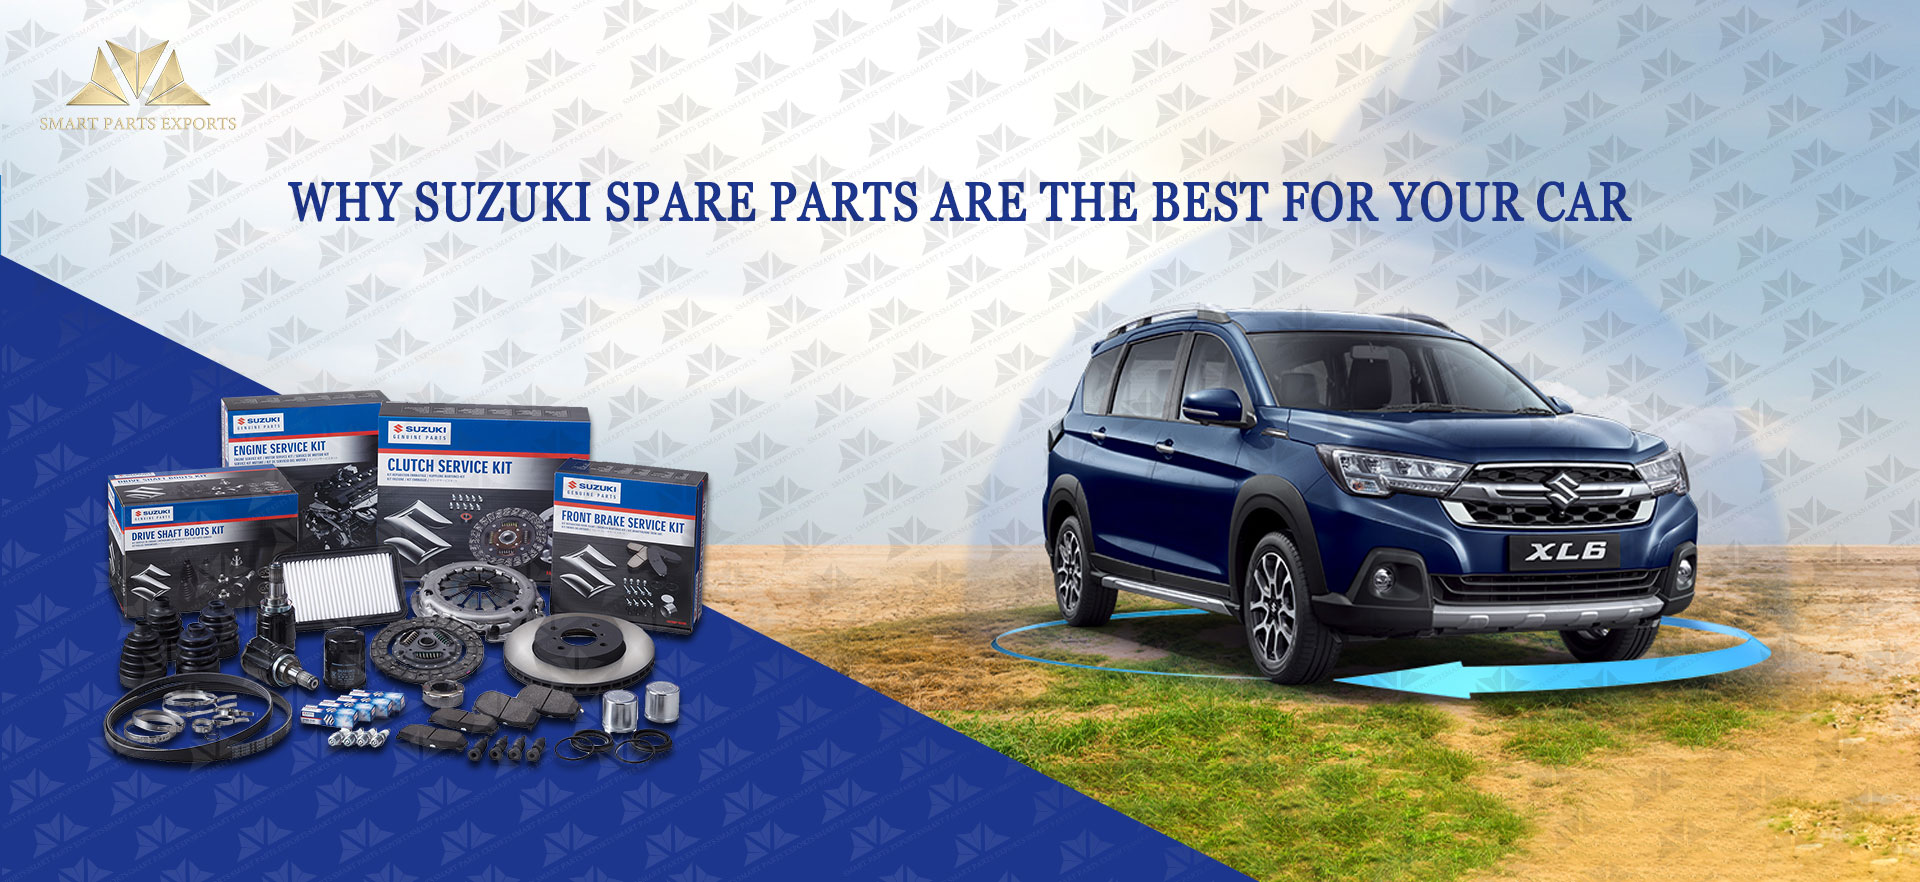 Why Suzuki Spare Parts are the Best for Your Car